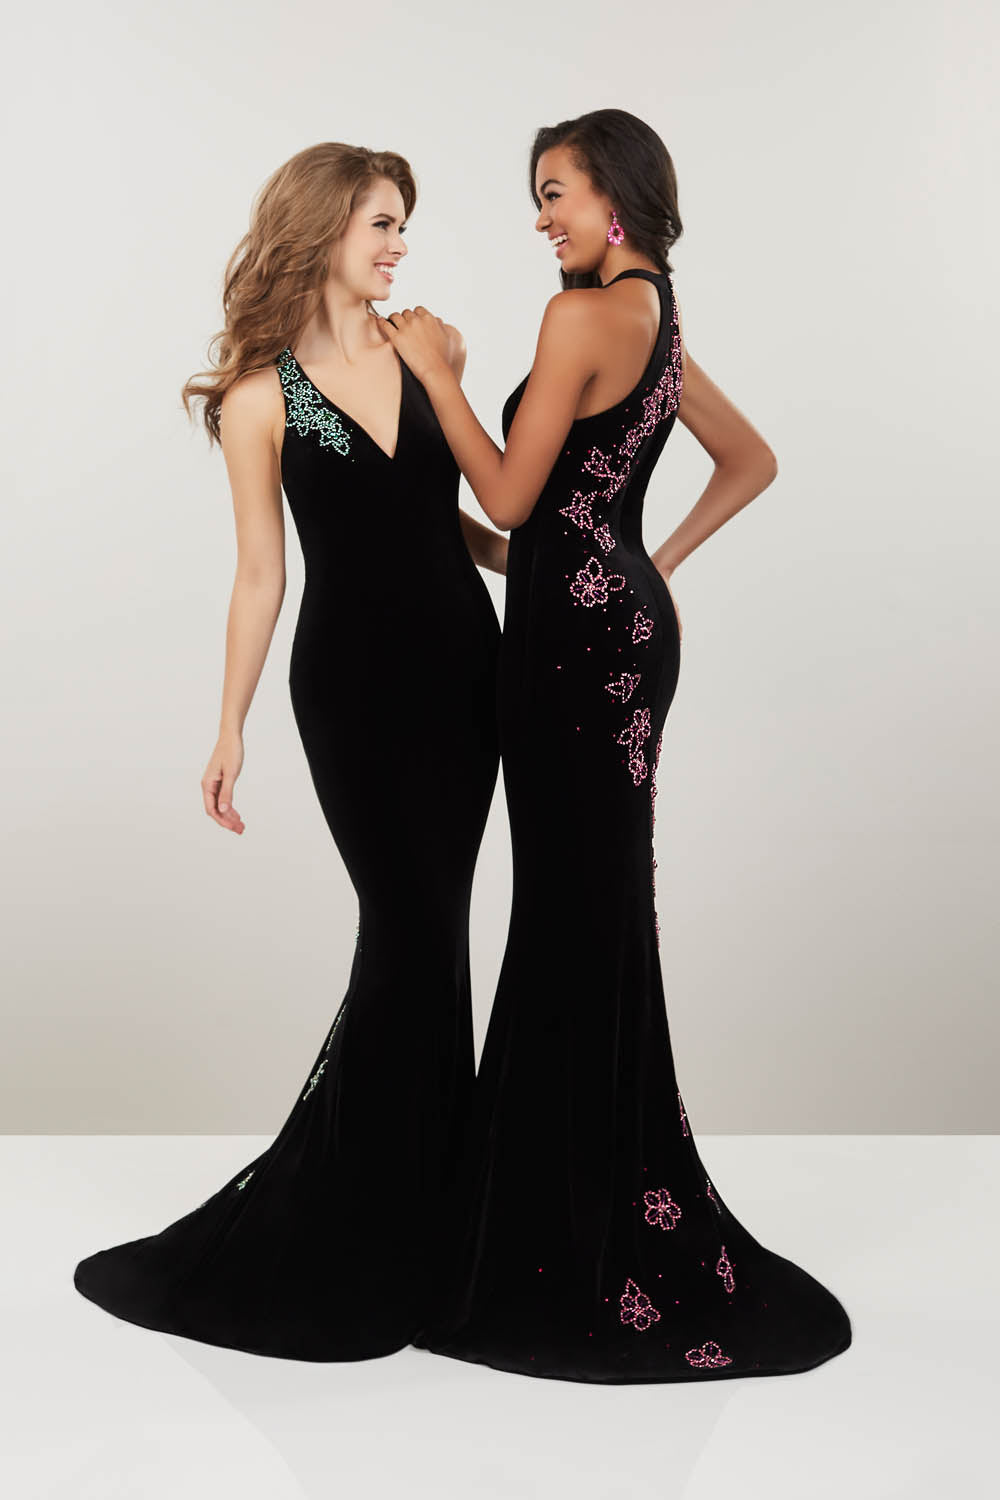 Panoply's Gorgeous Velvet Gowns